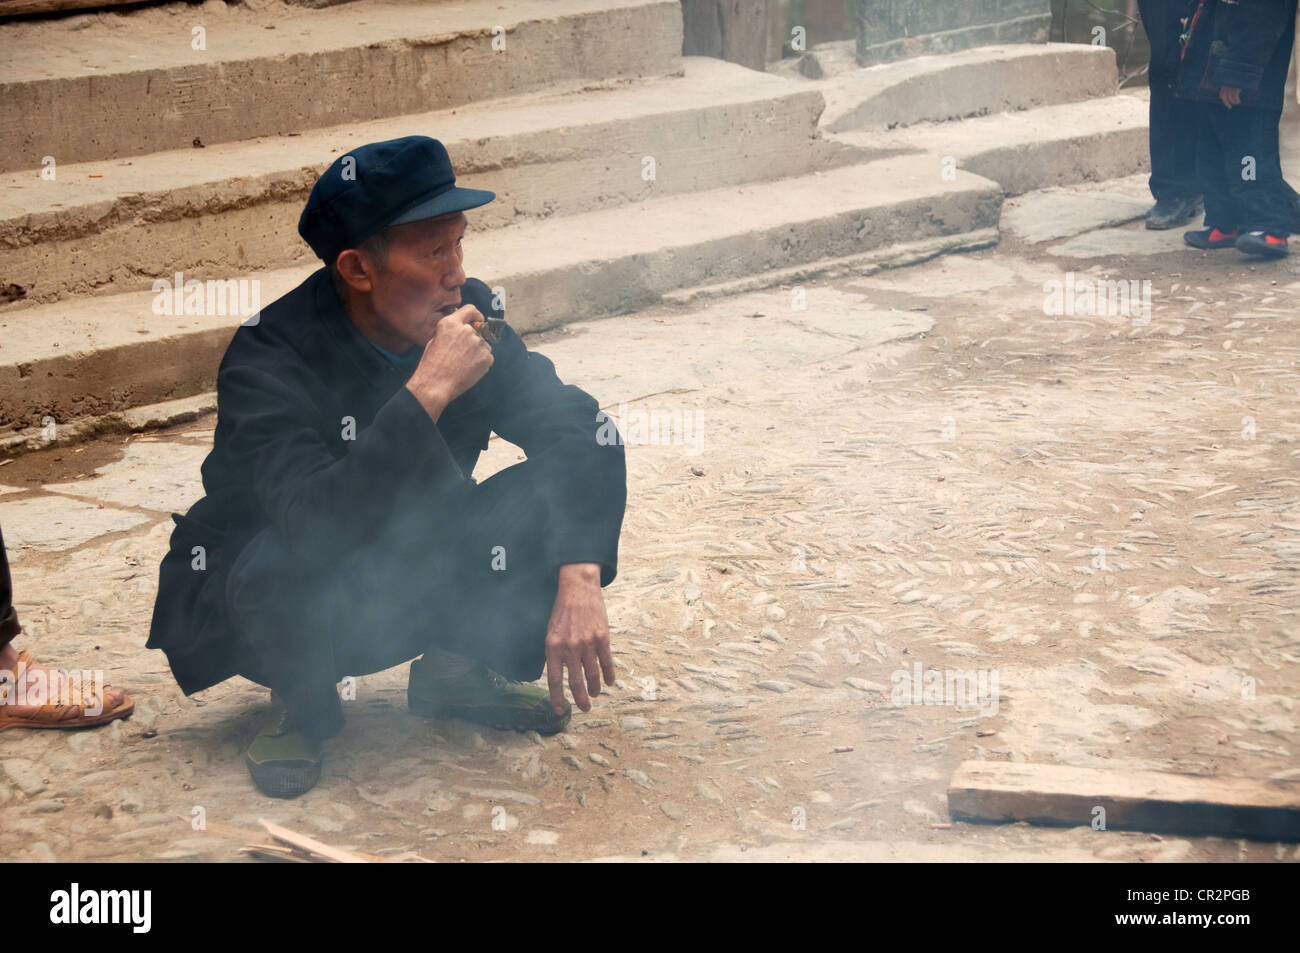 A mature man squat with a hat smoking a pipe, Zhaoxing Dong Village, Southern China Stock Photo